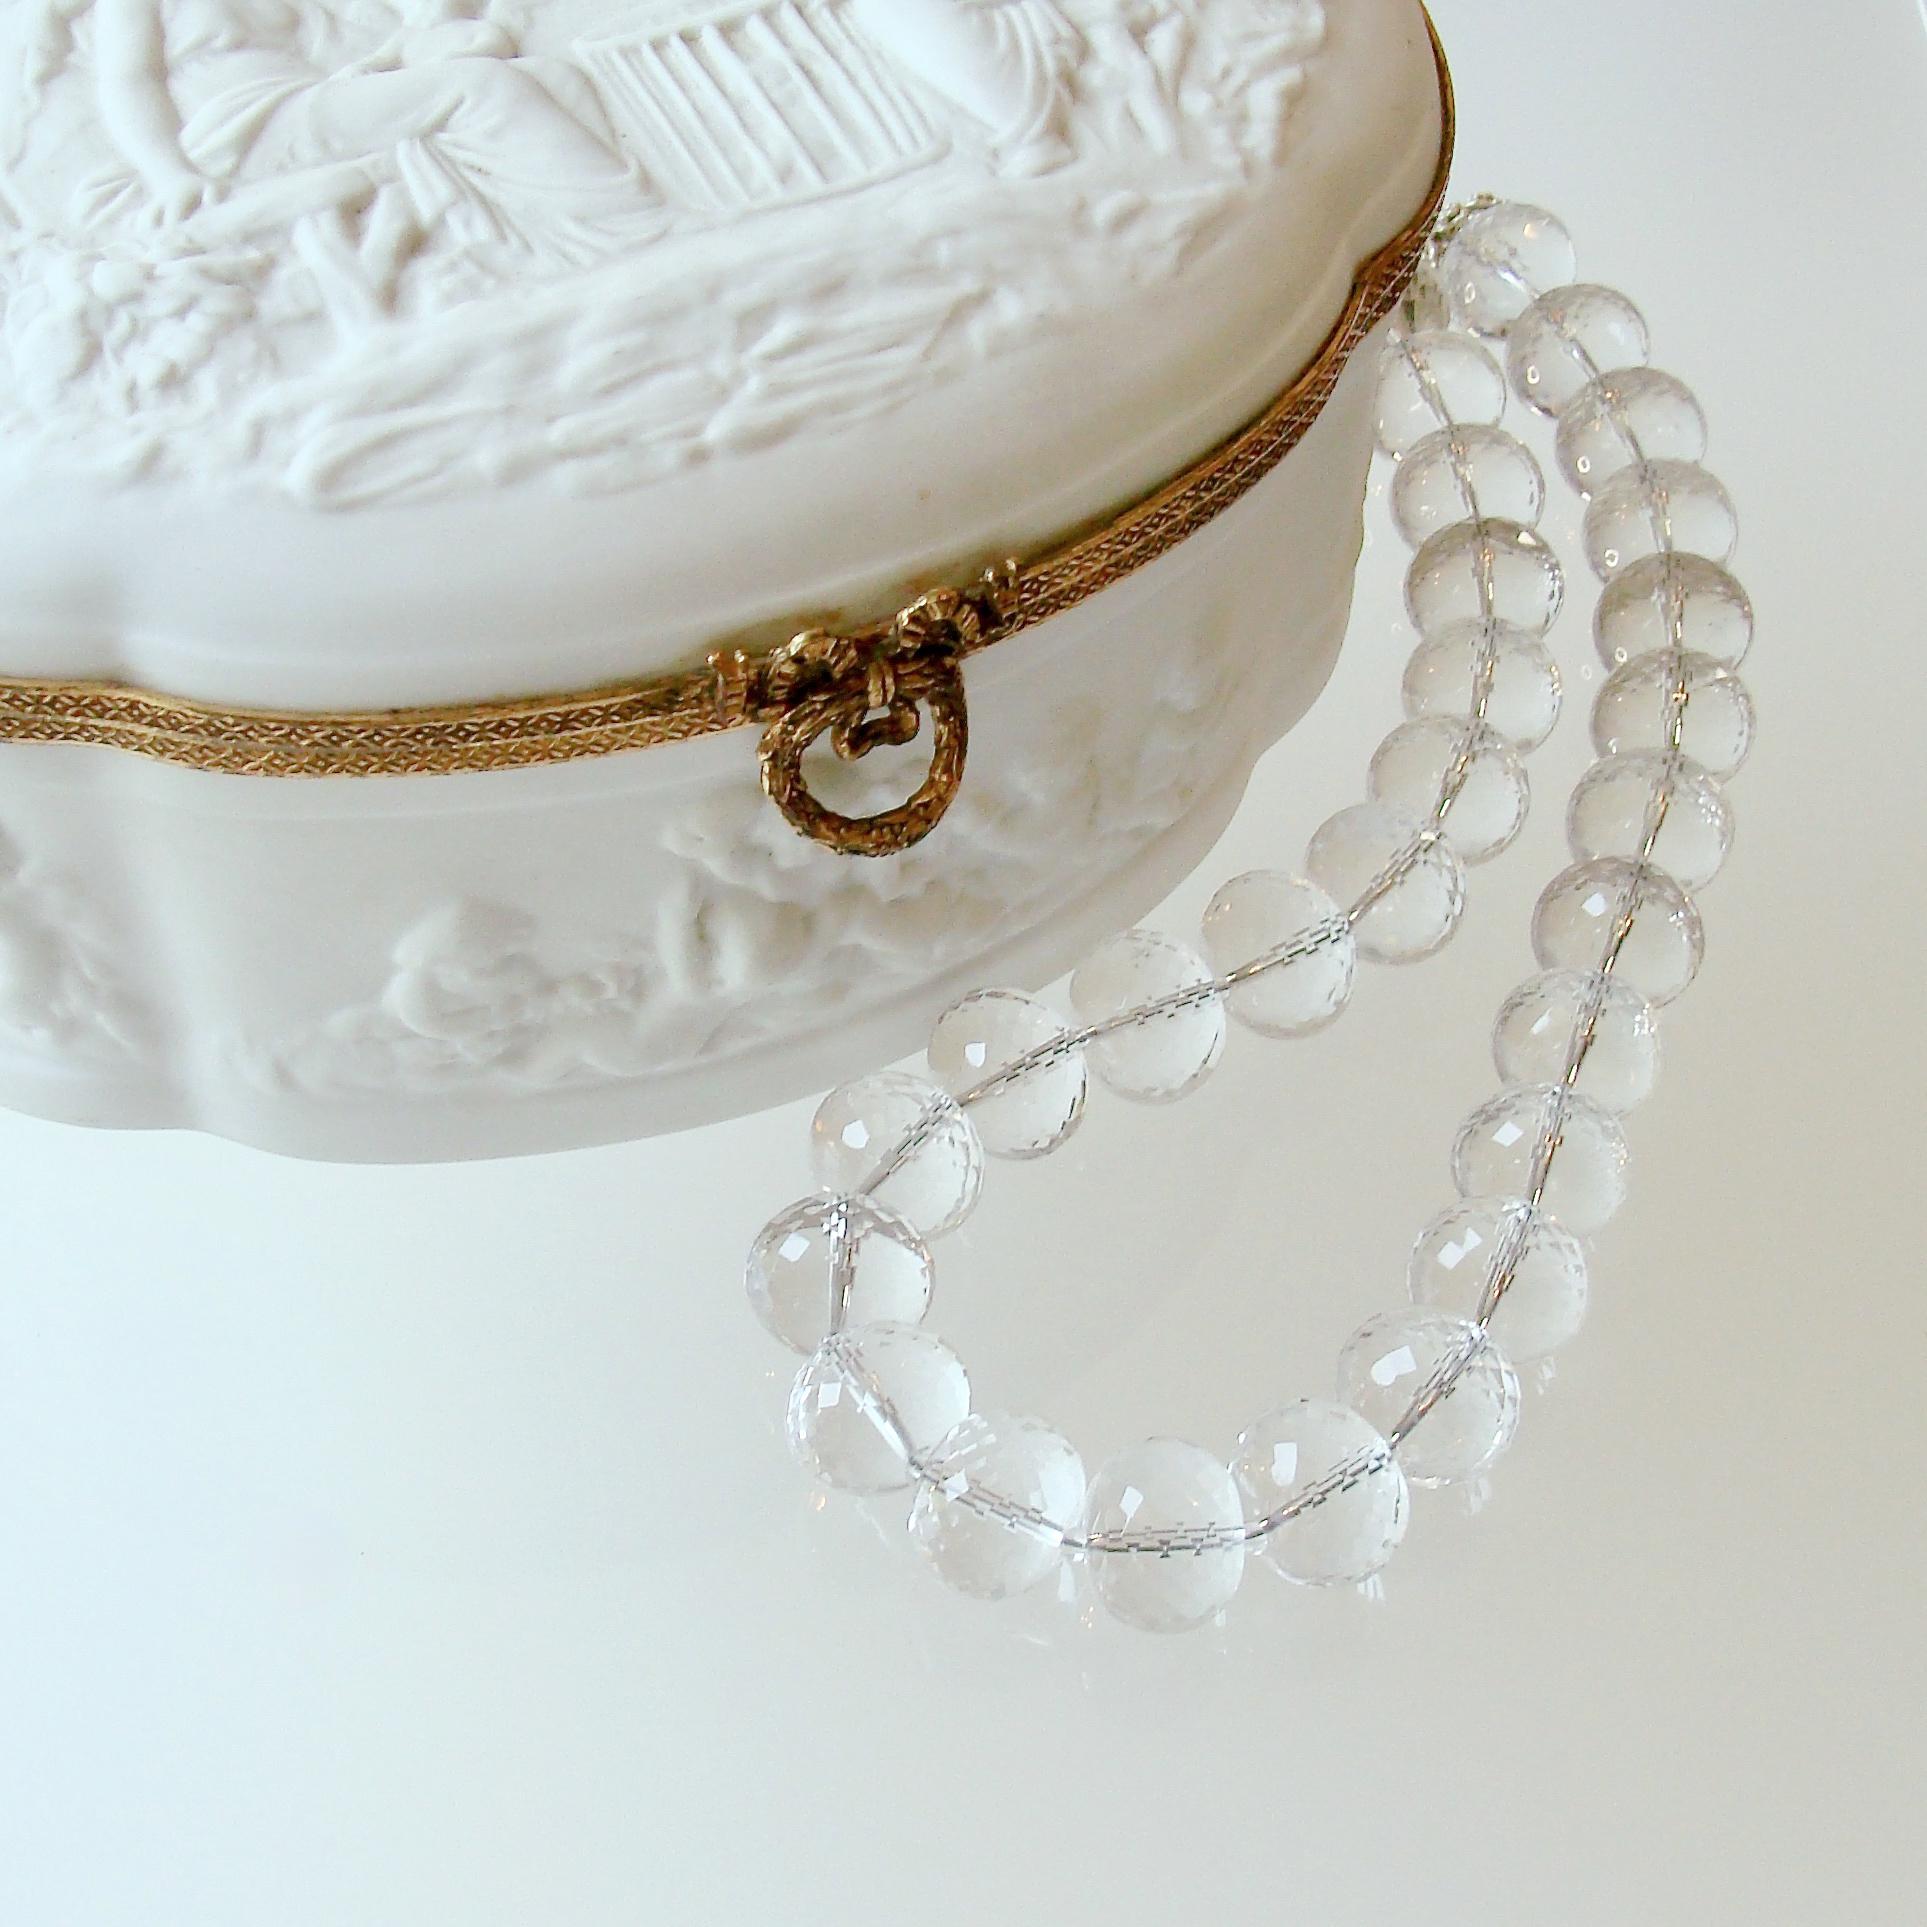 It is warm here today in Dallas and working on this stunning clear rock crystal necklace has simply been a delight.  Not only does it seem cool because of the clarity of the stones, but it would also be perfect for a  summer bridal necklace or a